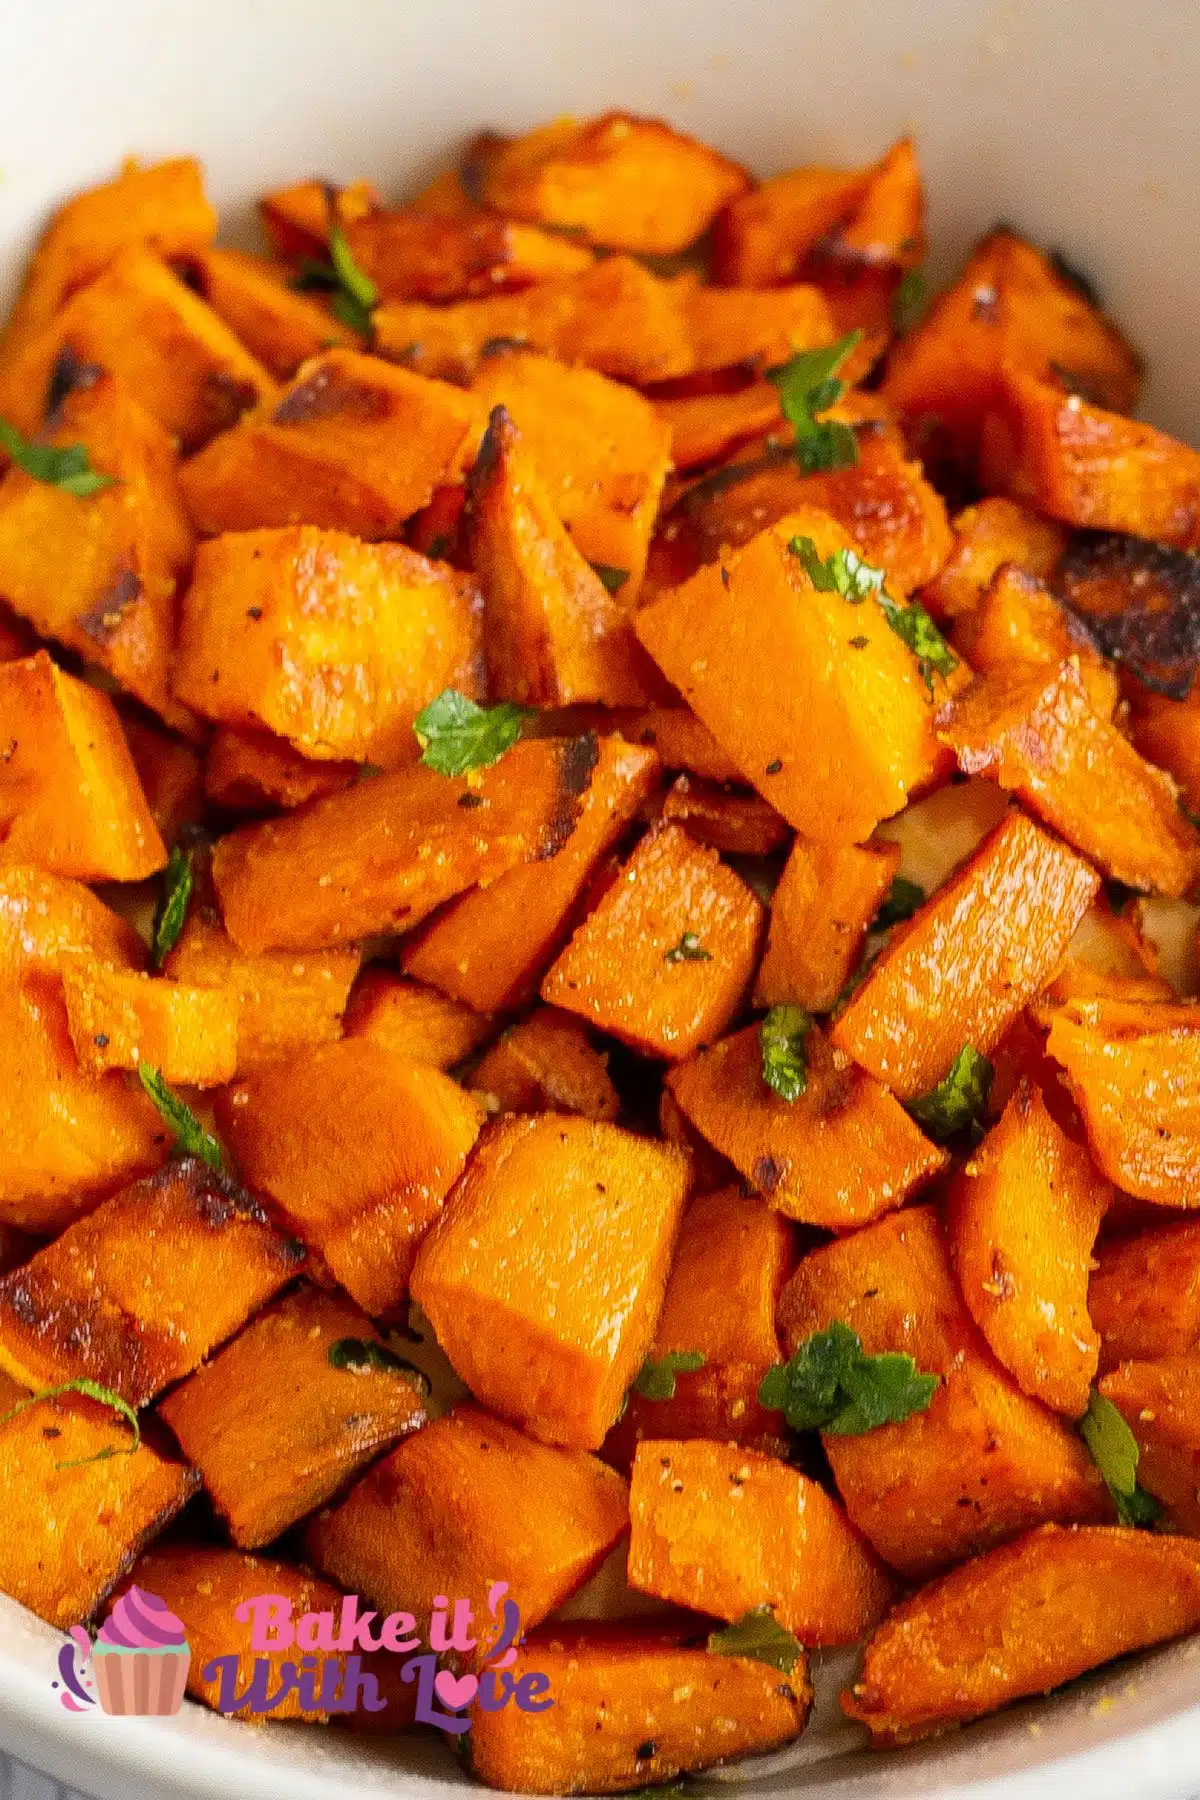 Sauteed sweet potatoes served in a white bowl with fresh chopped parsley.